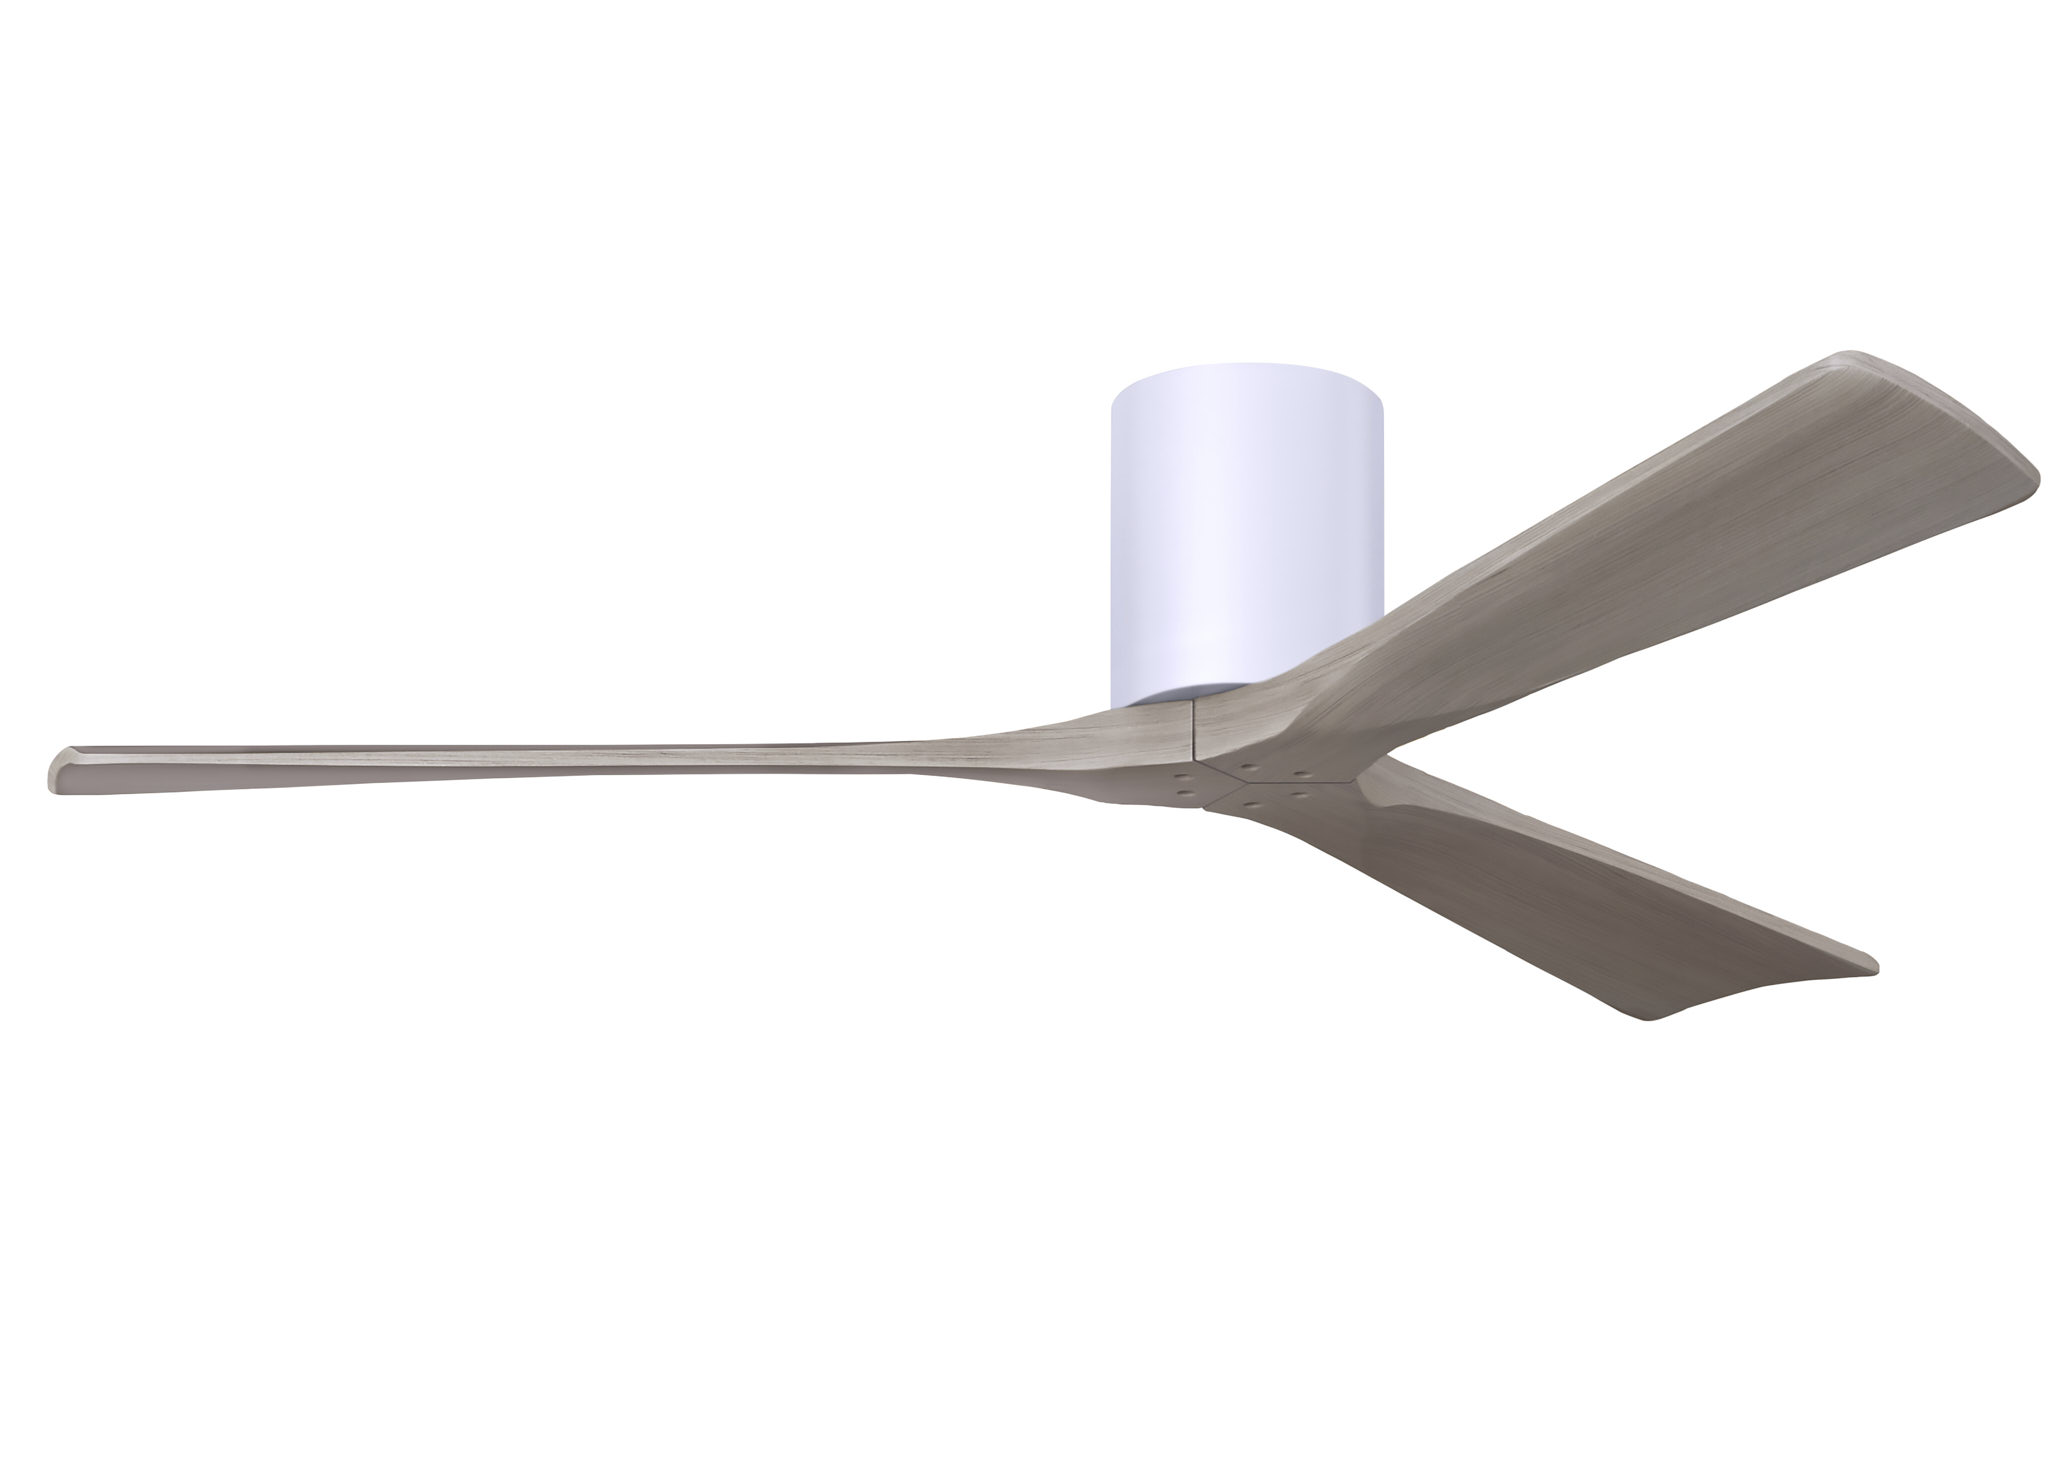 Irene-3H 6-speed ceiling fan in gloss white finish with 60